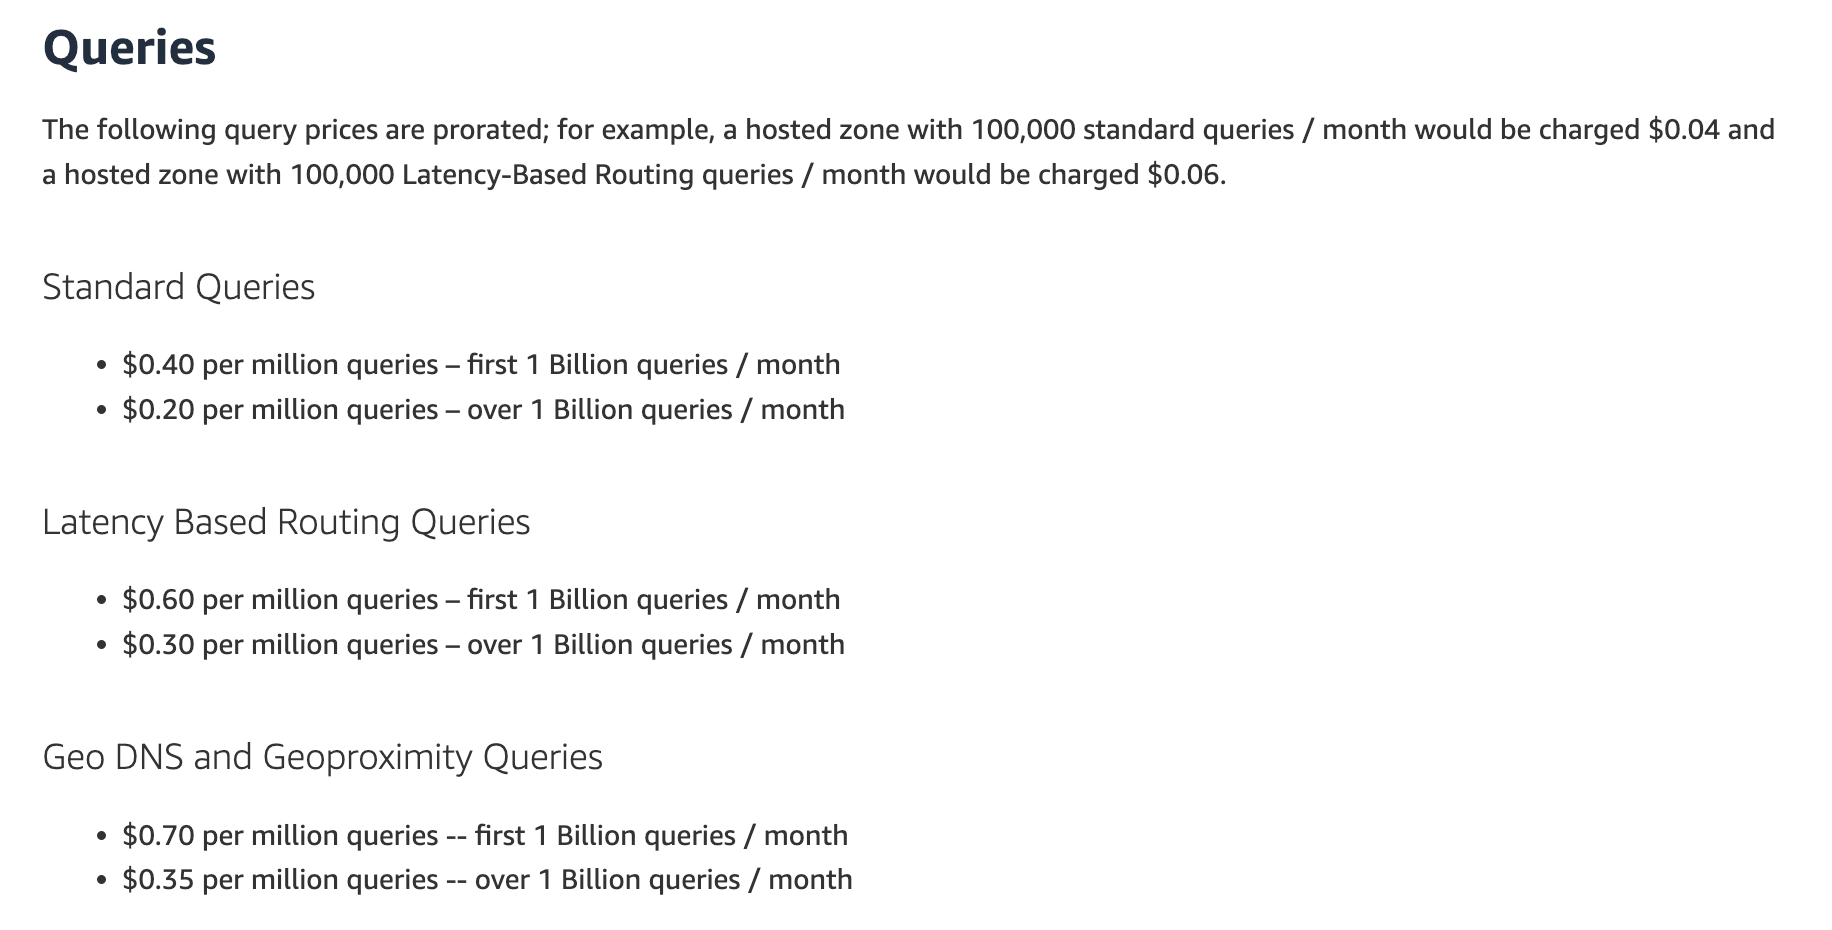 Queries The following query prices are prorated; for example, a hosted zone with 100,000 standard queries / month would be charged $0.04 and a hosted zone with 100,000 Latency-Based Routing queries / month would be charged $0.06. Standard Queries • $0.40 per million queries - first 1 Billion queries / month • $0.20 per million queries - over 1 Billion queries / month Latency Based Routing Queries • $0.60 per million queries - first 1 Billion queries / month • $0.30 per million queries - over 1 Billion queries / month Geo DNS and Geoproximity Queries • $0.70 per million queries -- first 1 Billion queries / month • $0.35 per million queries - over 1 Billion queries / month